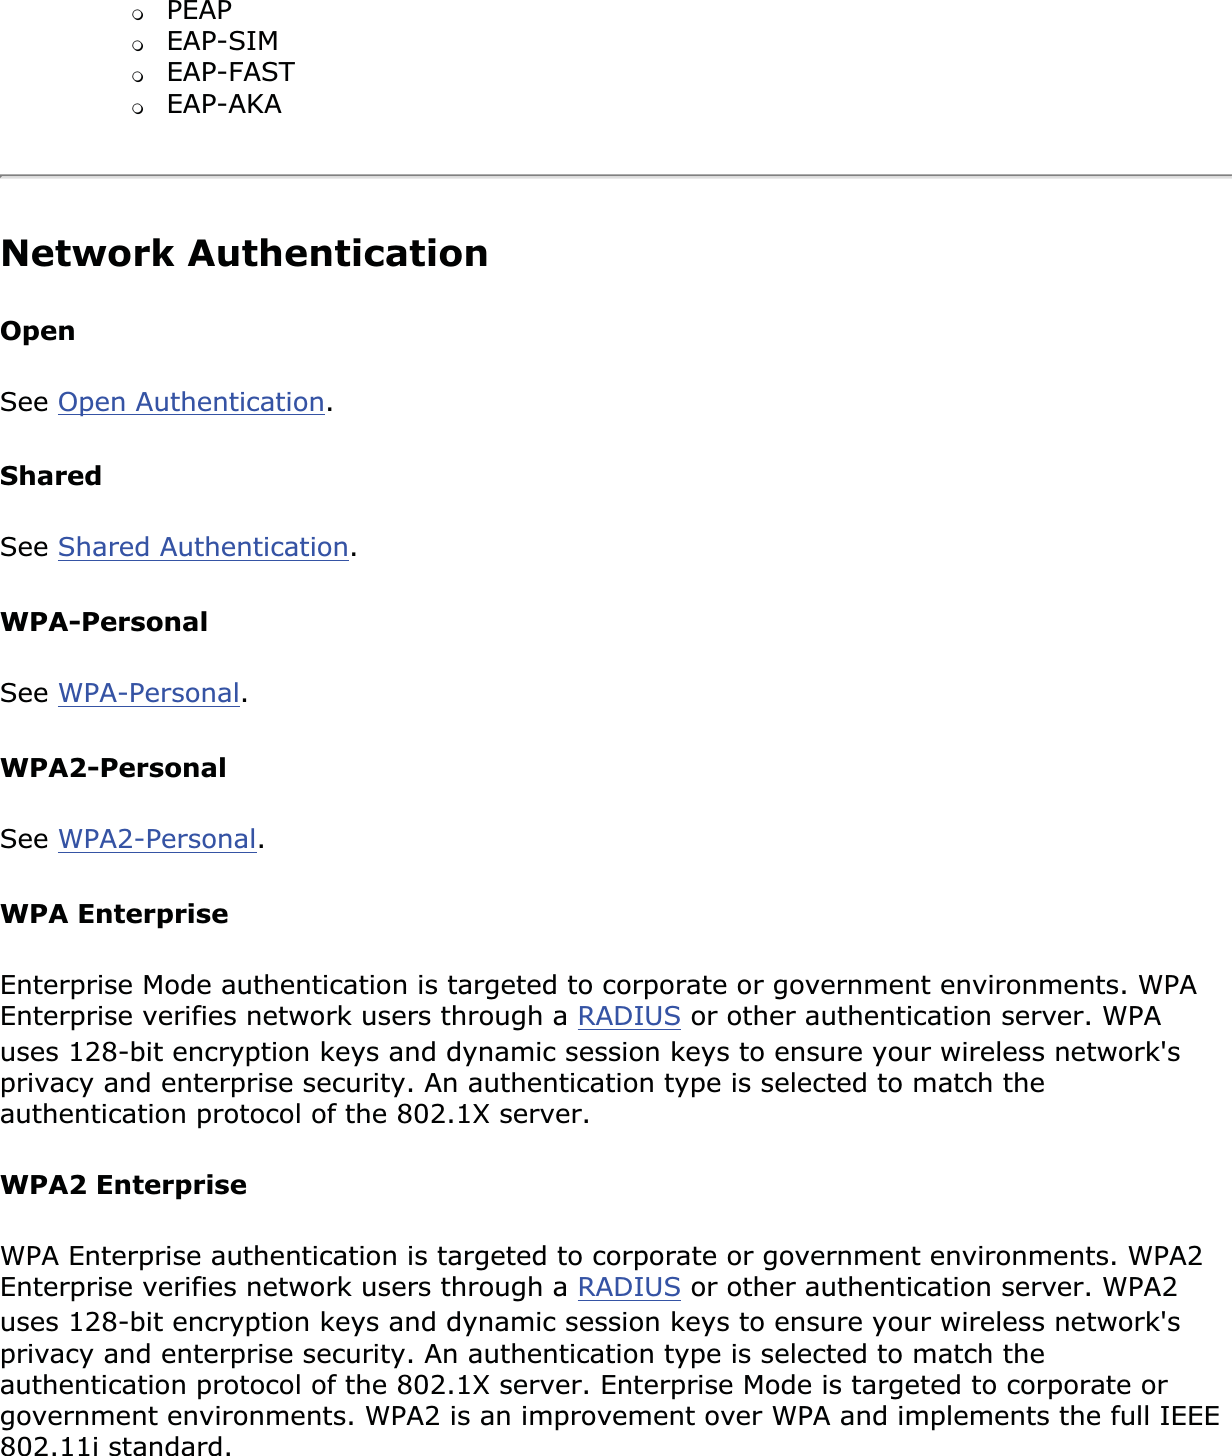 ❍PEAP❍EAP-SIM❍EAP-FAST❍EAP-AKANetwork Authentication OpenSee Open Authentication.SharedSee Shared Authentication.WPA-PersonalSee WPA-Personal.WPA2-PersonalSee WPA2-Personal.WPA EnterpriseEnterprise Mode authentication is targeted to corporate or government environments. WPA Enterprise verifies network users through a RADIUS or other authentication server. WPA uses 128-bit encryption keys and dynamic session keys to ensure your wireless network&apos;s privacy and enterprise security. An authentication type is selected to match the authentication protocol of the 802.1X server. WPA2 EnterpriseWPA Enterprise authentication is targeted to corporate or government environments. WPA2 Enterprise verifies network users through a RADIUS or other authentication server. WPA2 uses 128-bit encryption keys and dynamic session keys to ensure your wireless network&apos;s privacy and enterprise security. An authentication type is selected to match the authentication protocol of the 802.1X server. Enterprise Mode is targeted to corporate or government environments. WPA2 is an improvement over WPA and implements the full IEEE 802.11i standard. 